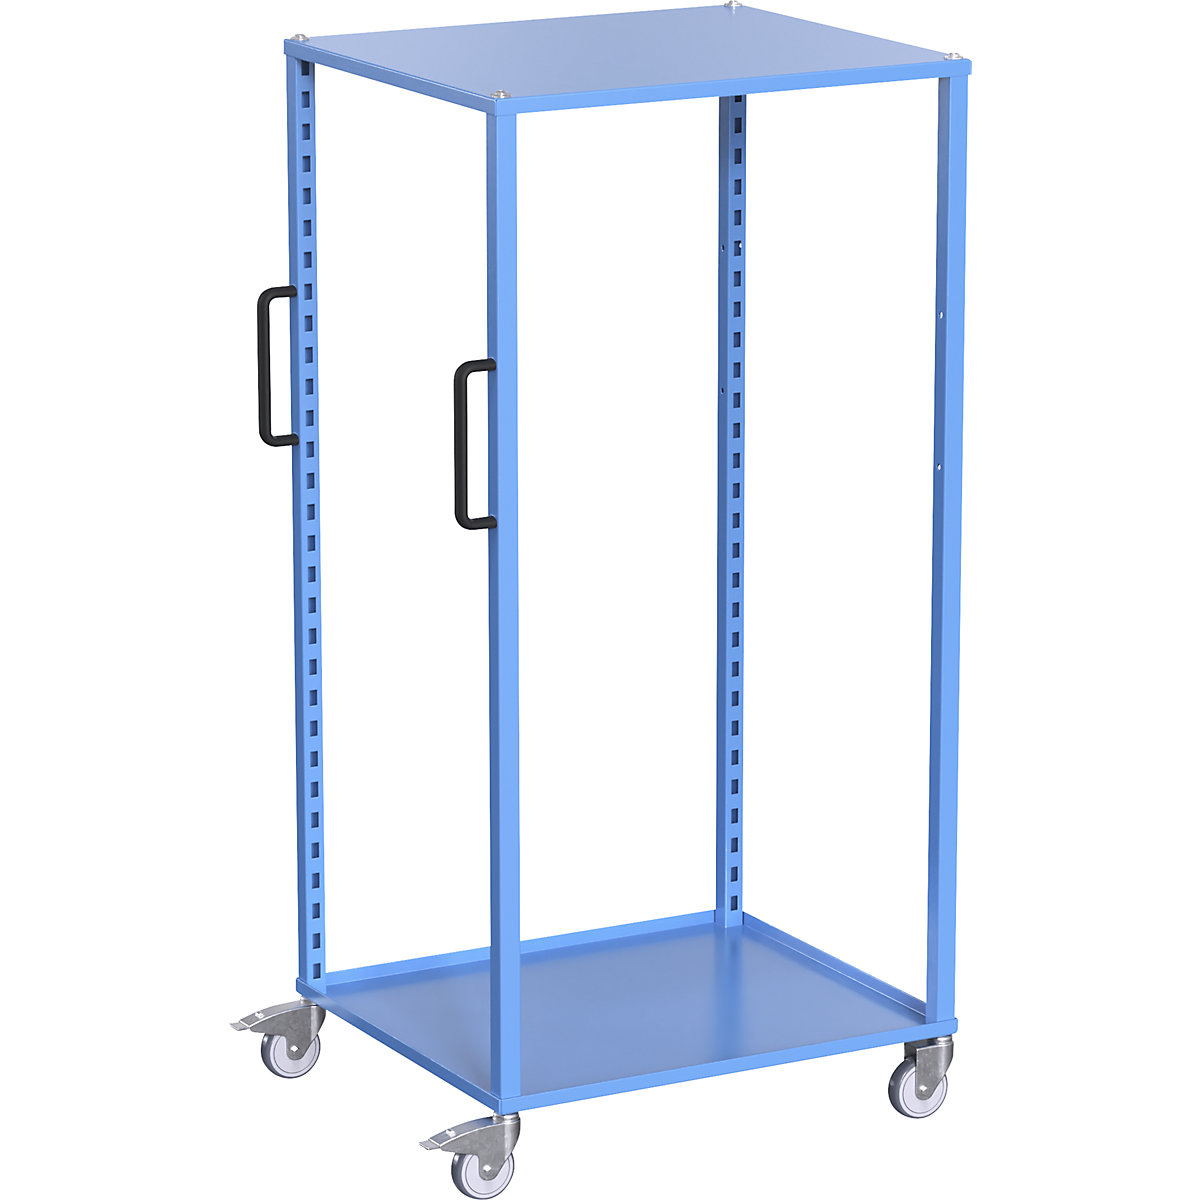 CustomLine Euro platform trolley – eurokraft pro, for containers LxW 800 x 600 mm, without boxes, blue-1